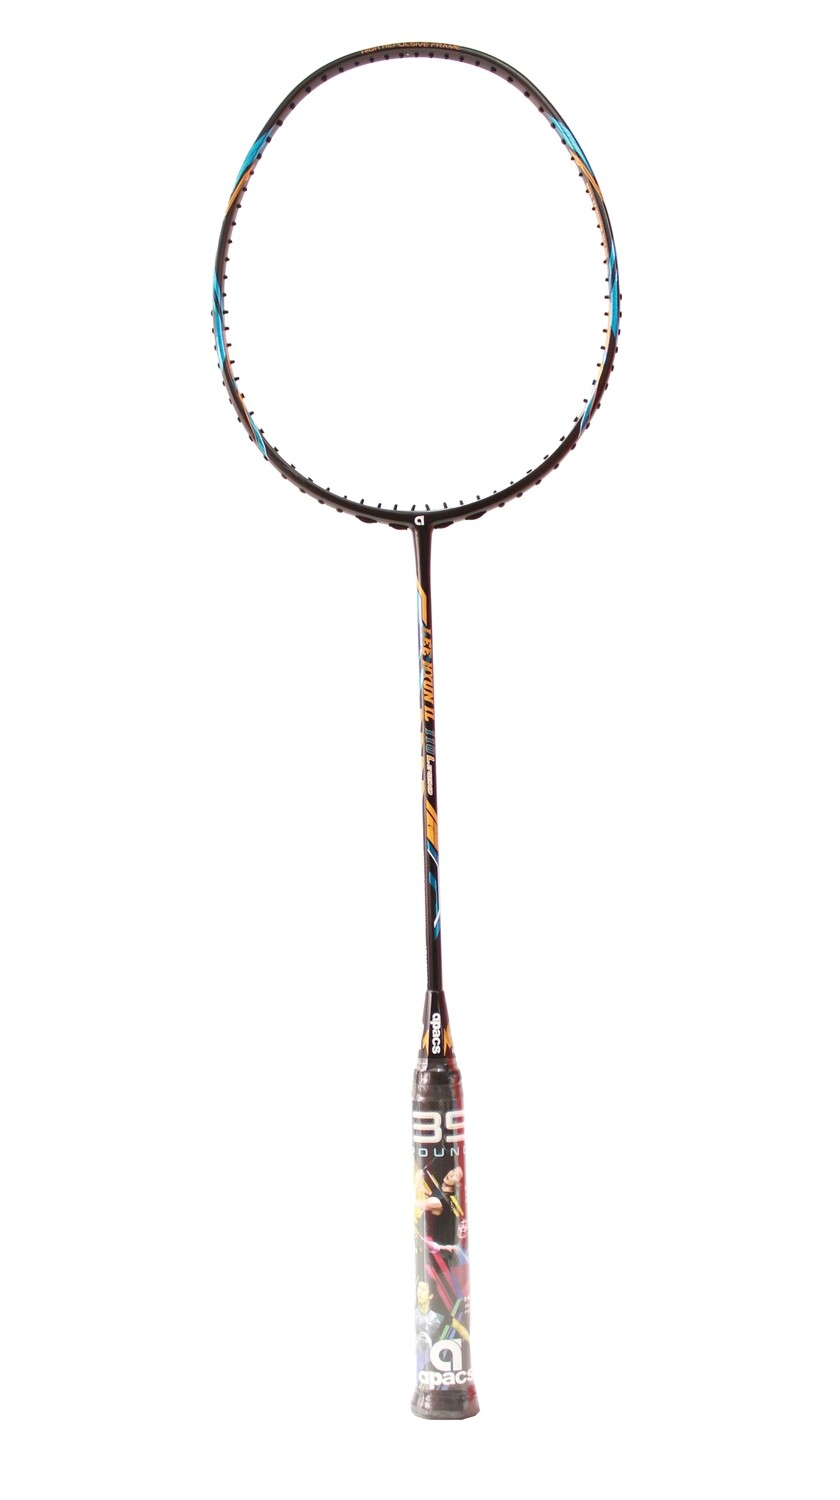 Apacs Lee Hyun IL 110 Legend Badminton Racquet- with Full Cover